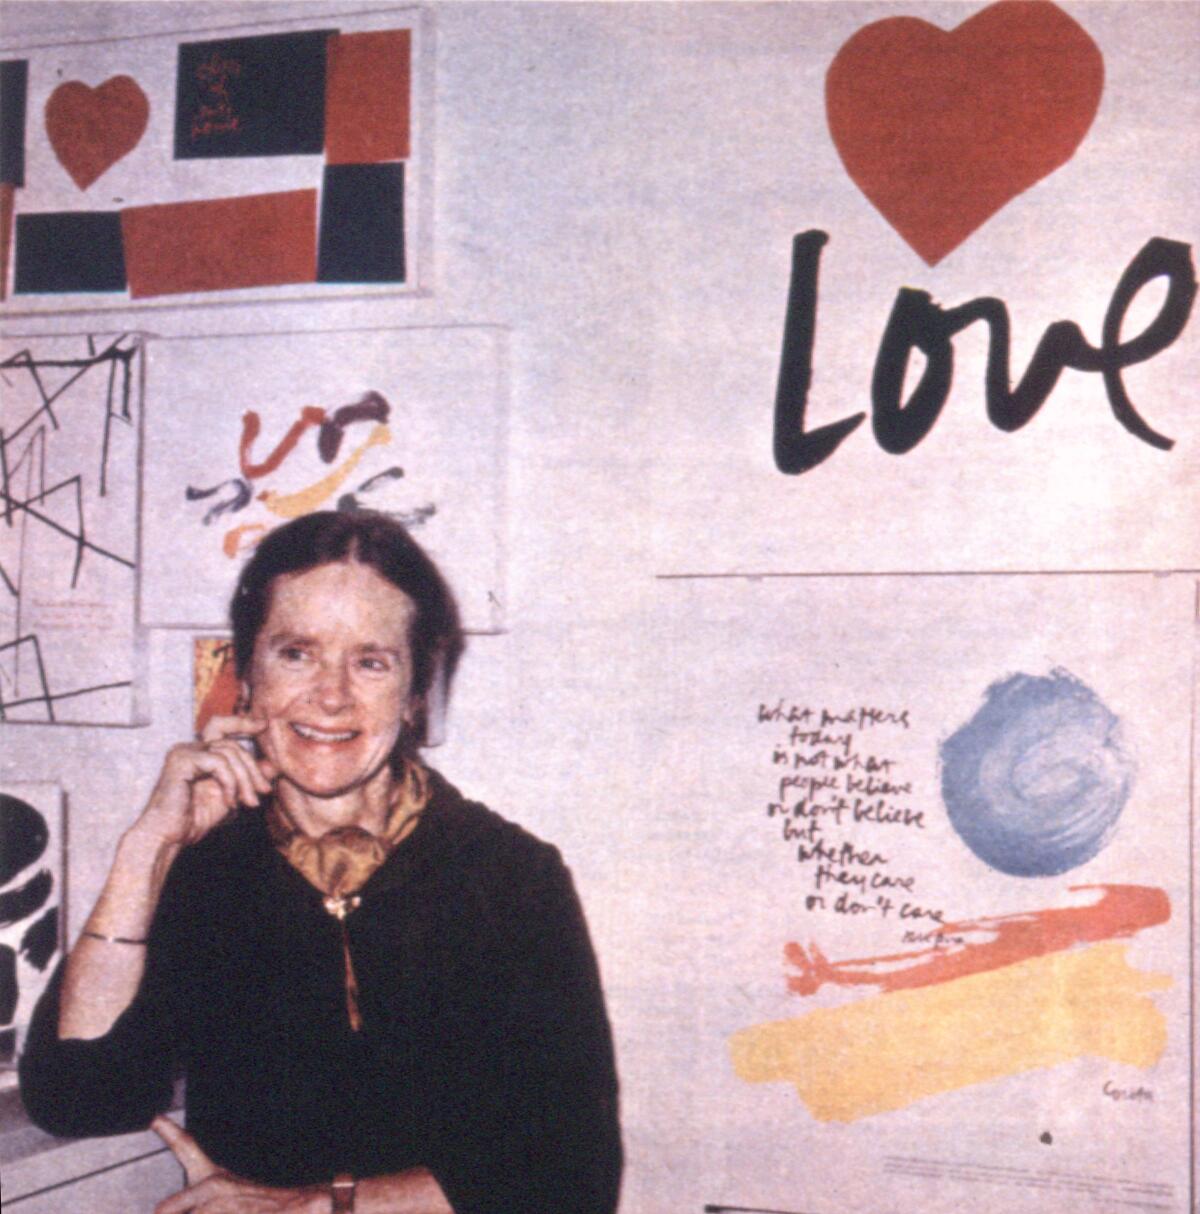 A woman sits and smiles in front of colorful prints, including one that reads "LOVE"